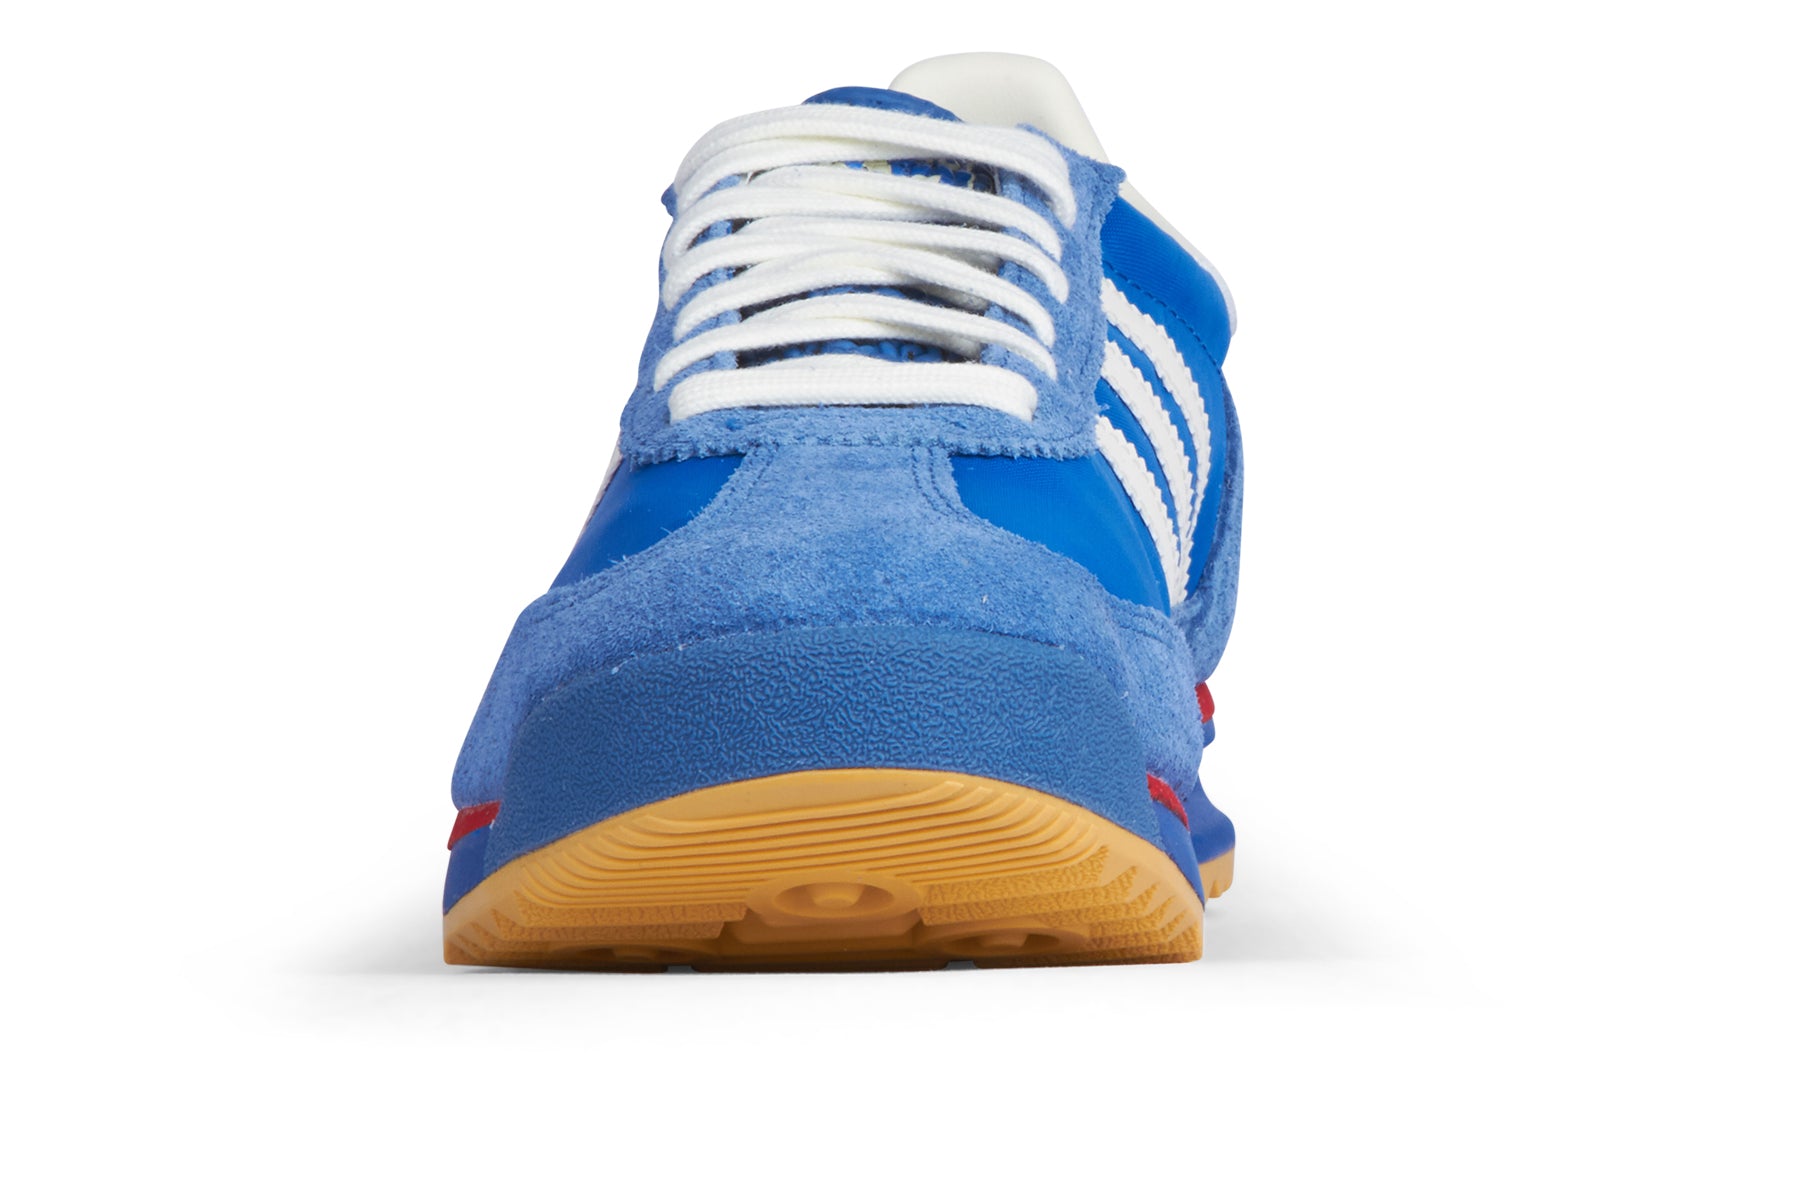 Adidas SL 72 RS - Blue/Core White/Better Scarlet